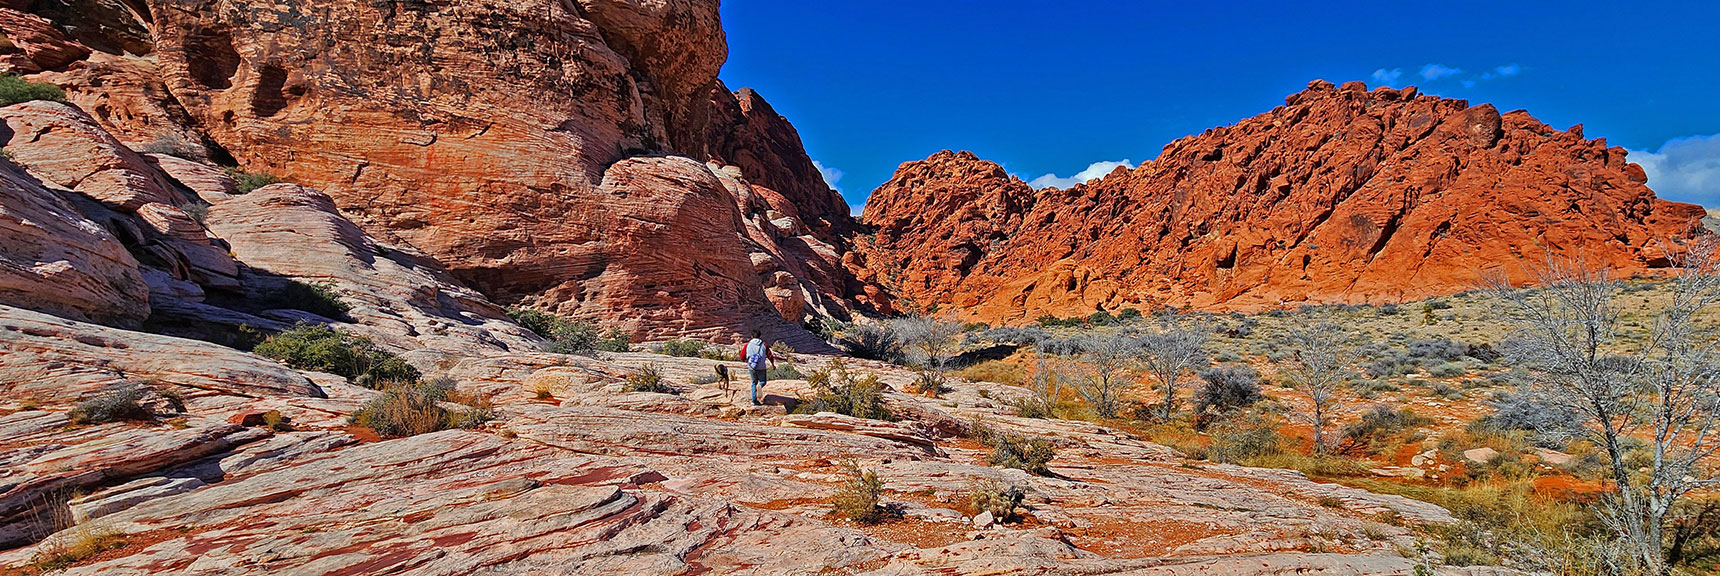 Approaching the Black Corridor at Upper End of Calico Basin Trail | Calico Basin Daily Workout Trails | Calico Basin, Nevada